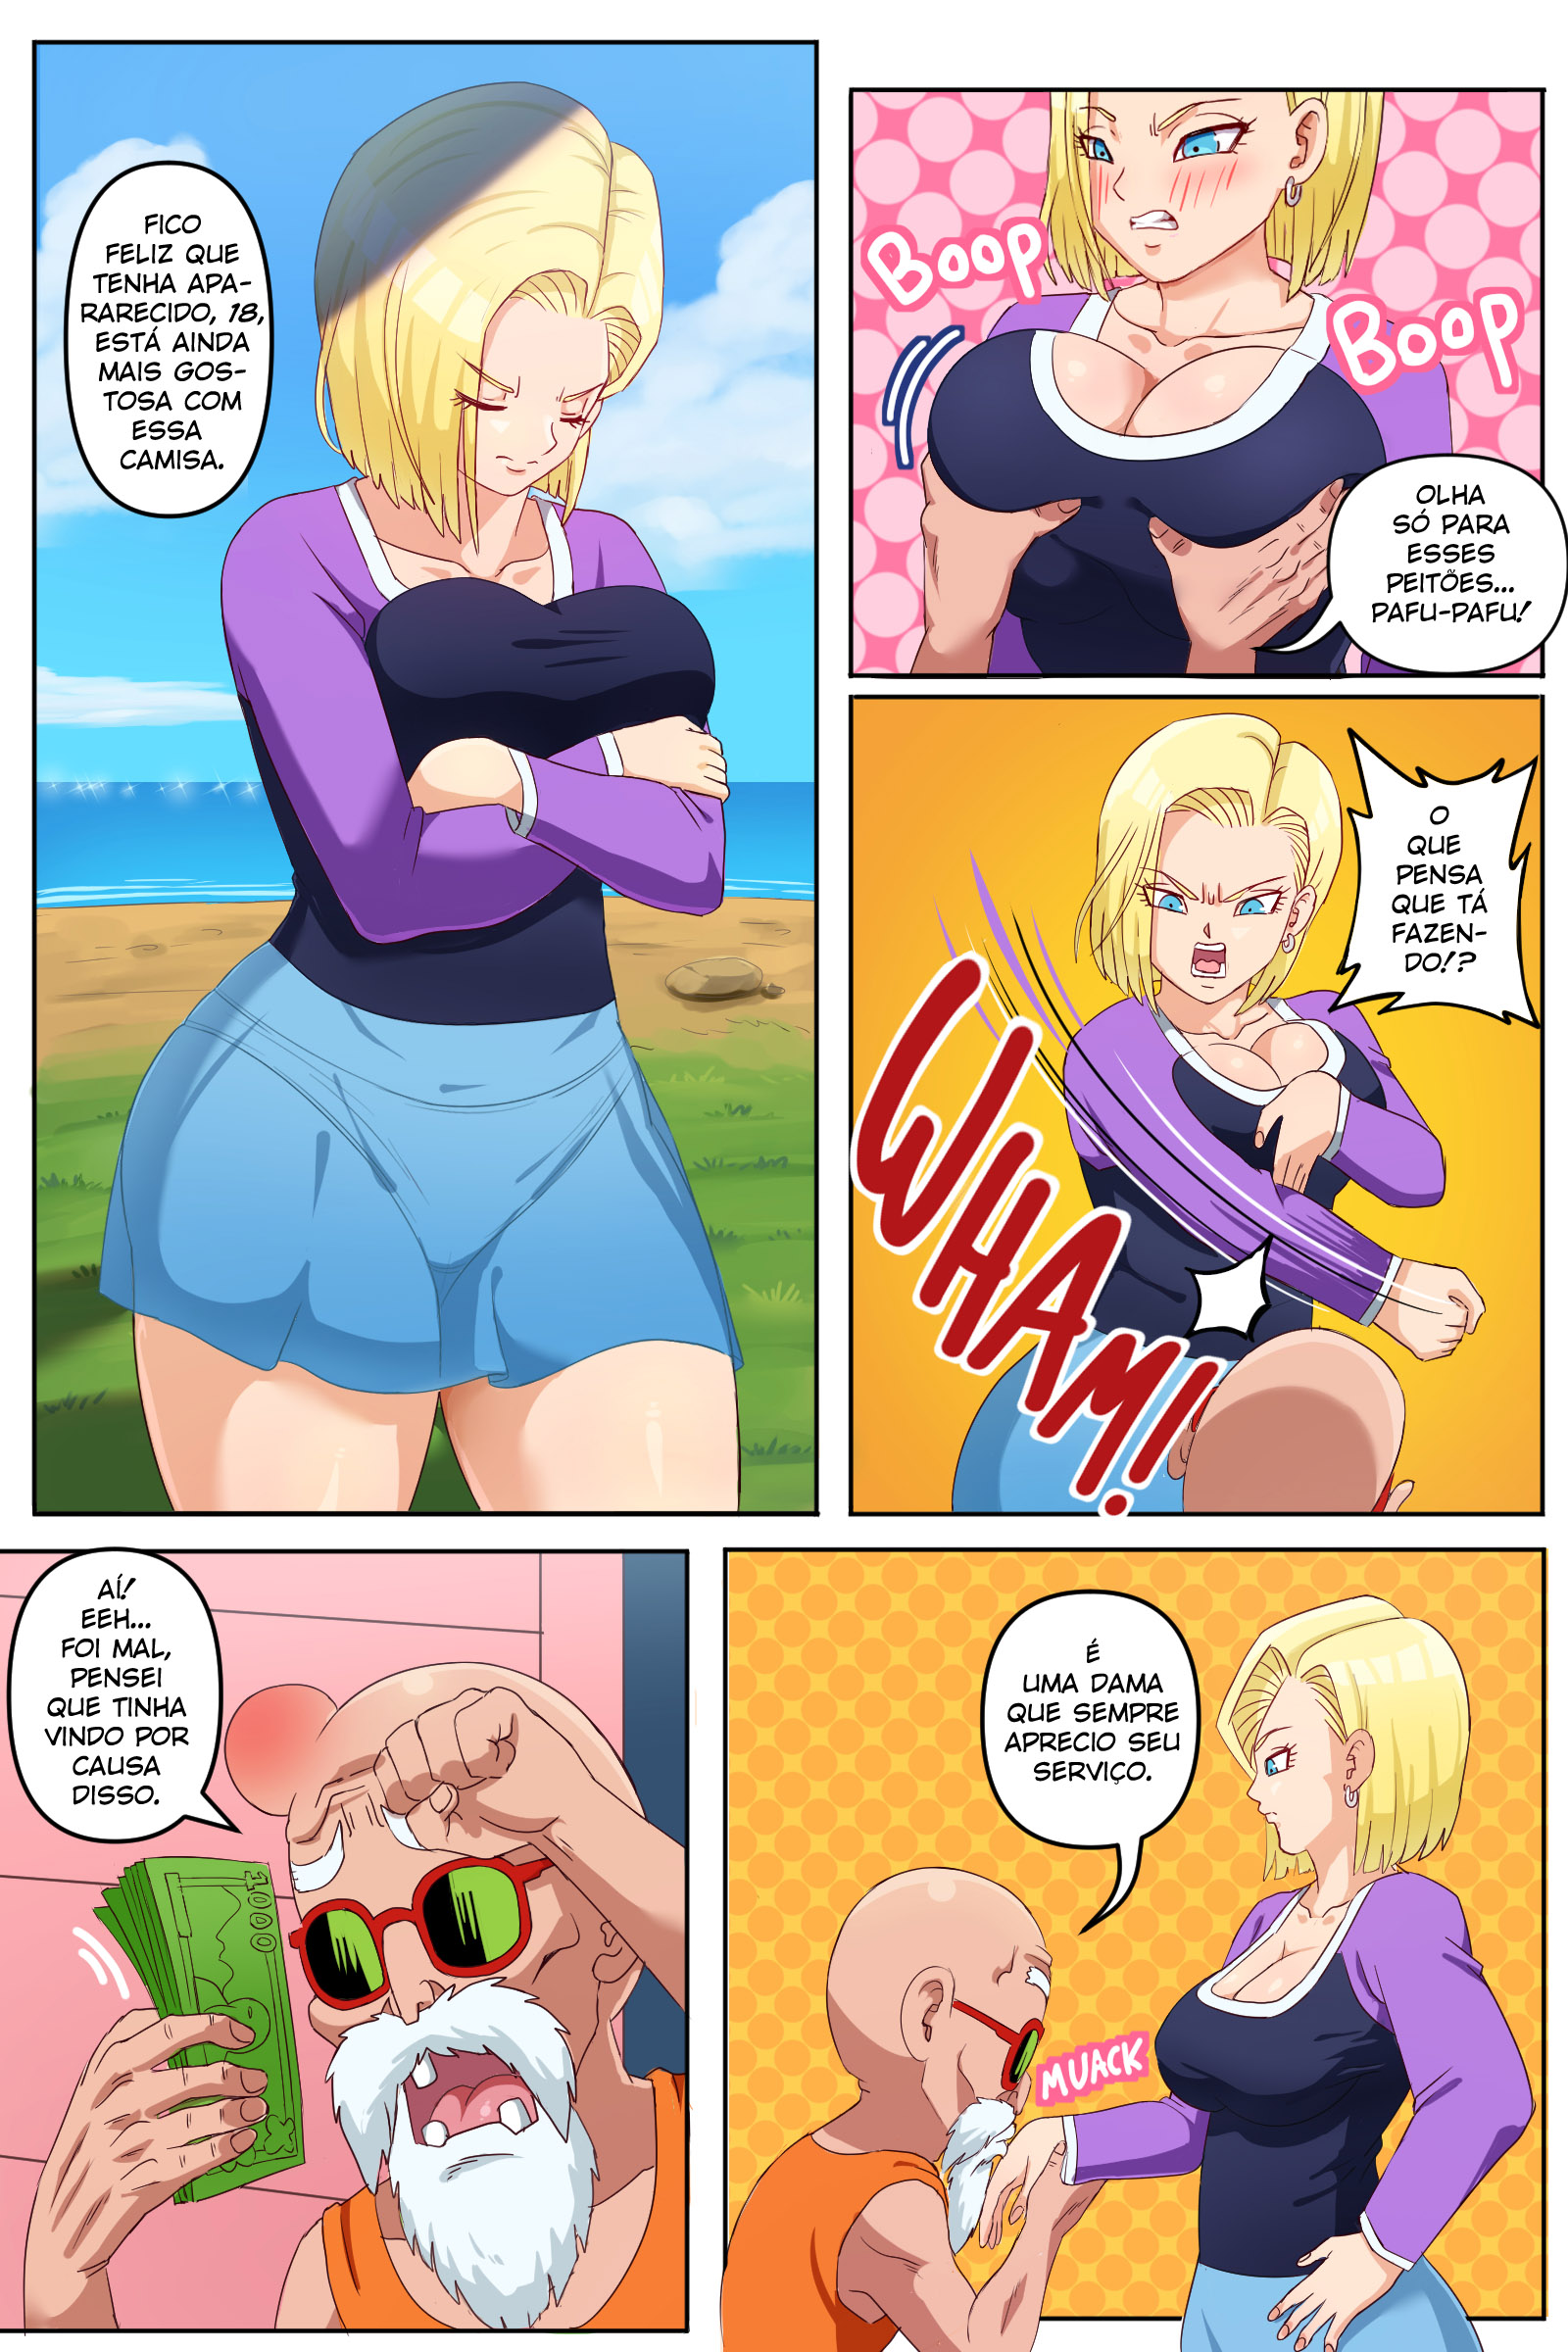 Android 18 NTR - 4